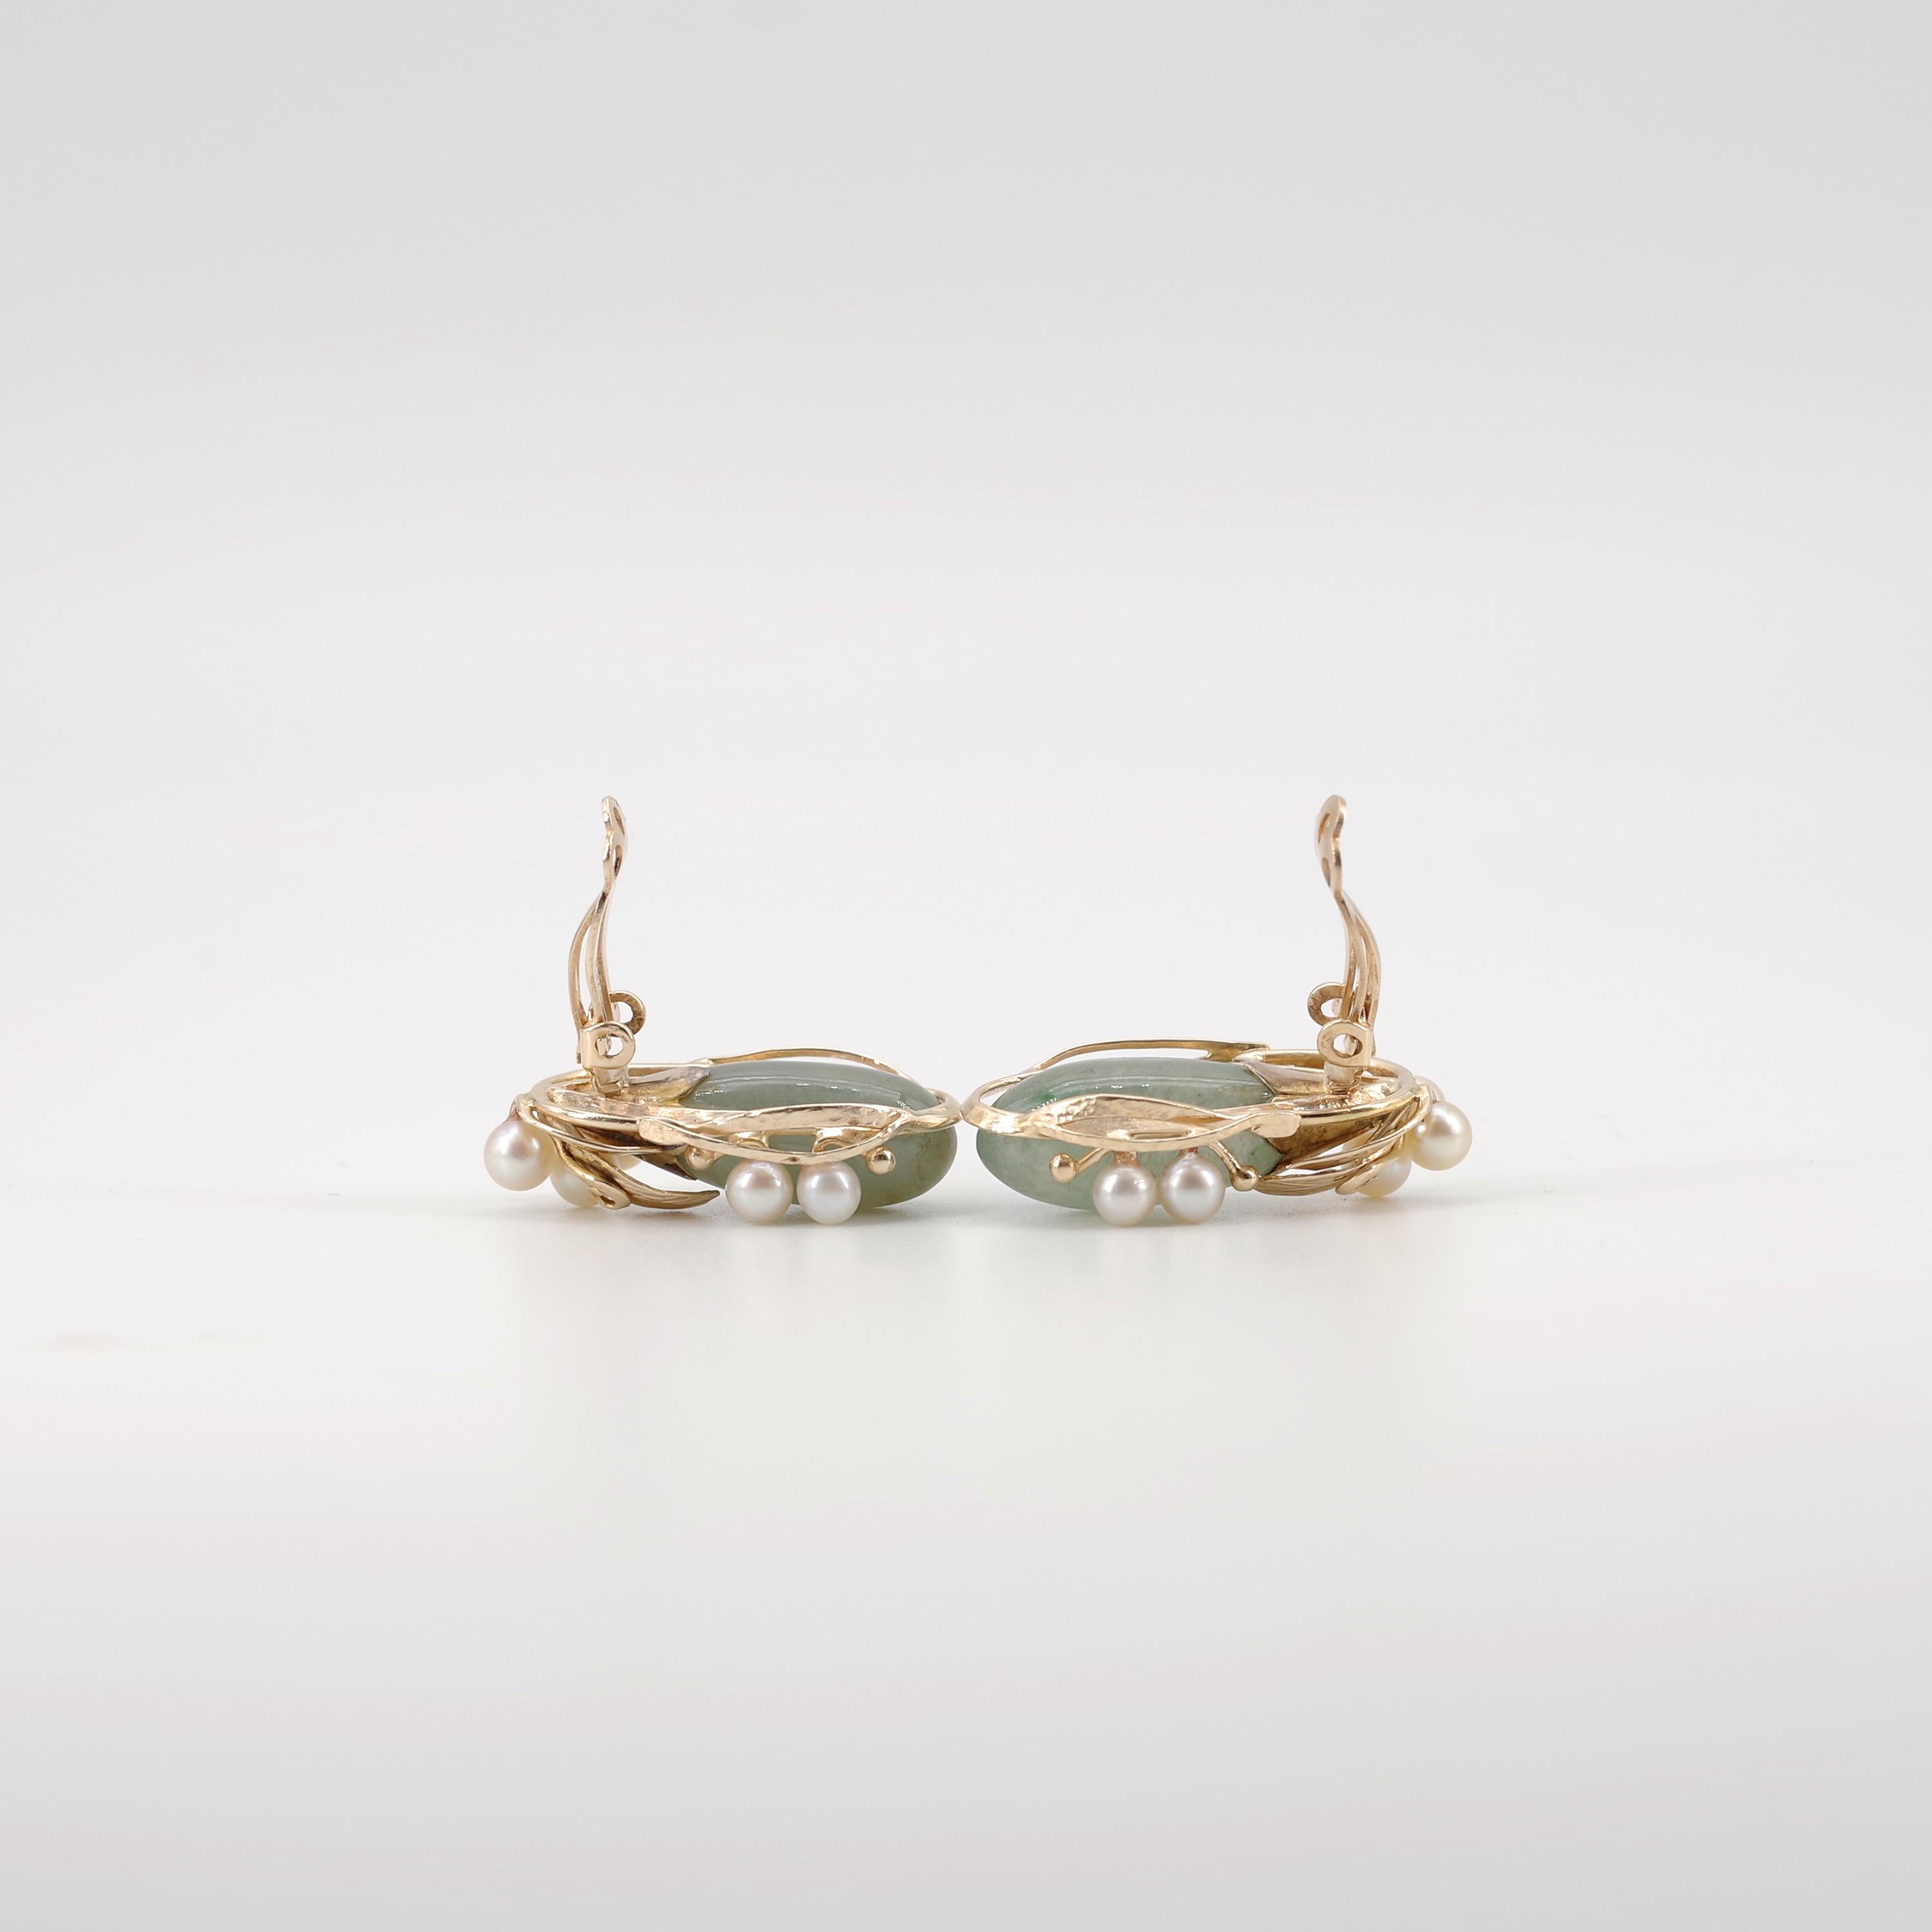 Jade and Pearl Earrings from Ming's Hawaii 1